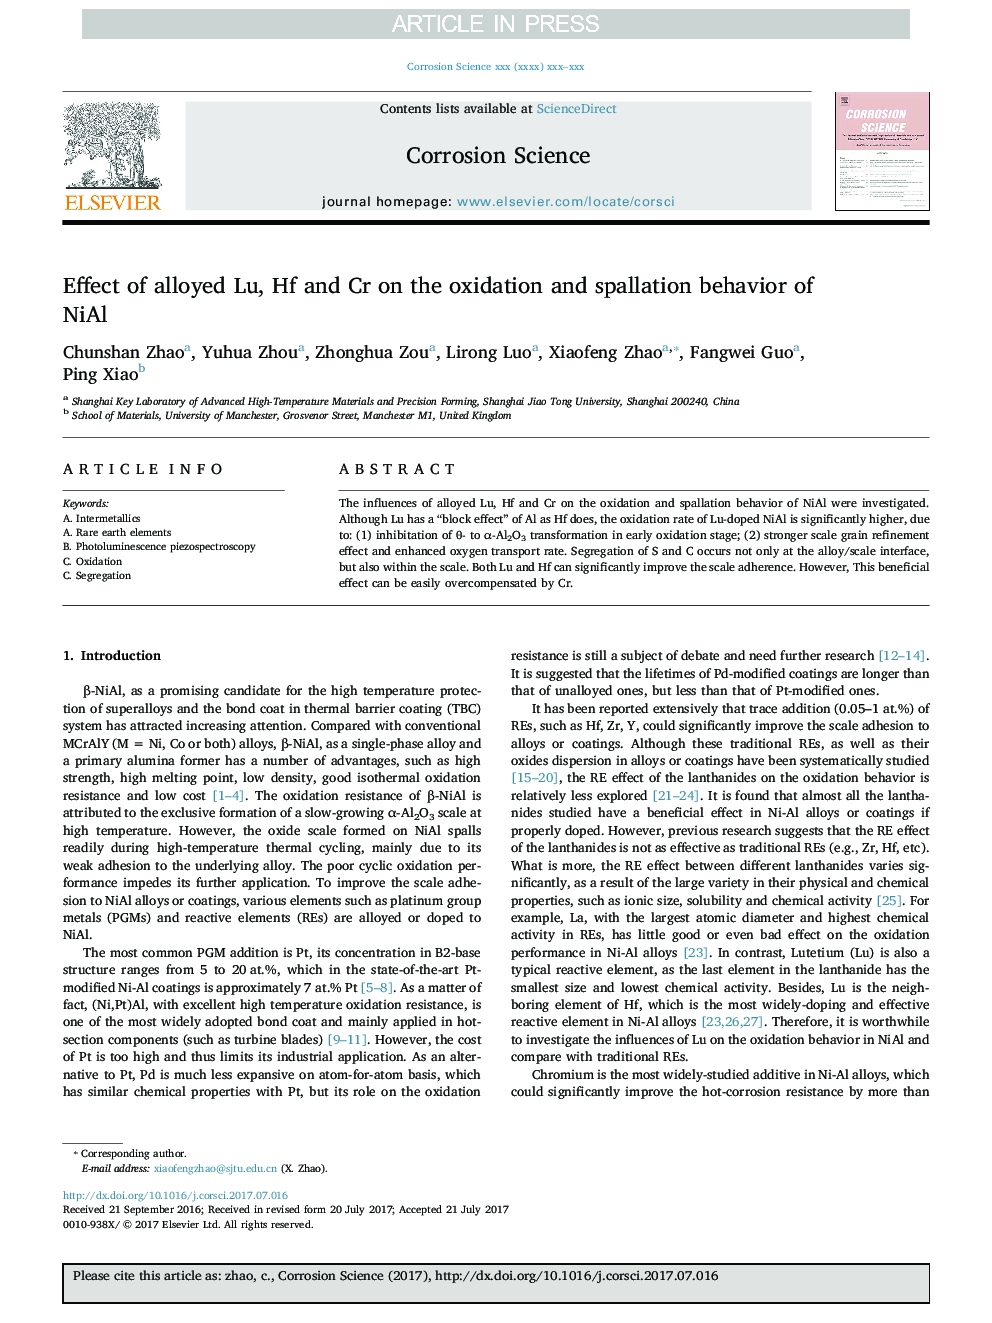 Effect of alloyed Lu, Hf and Cr on the oxidation and spallation behavior of NiAl